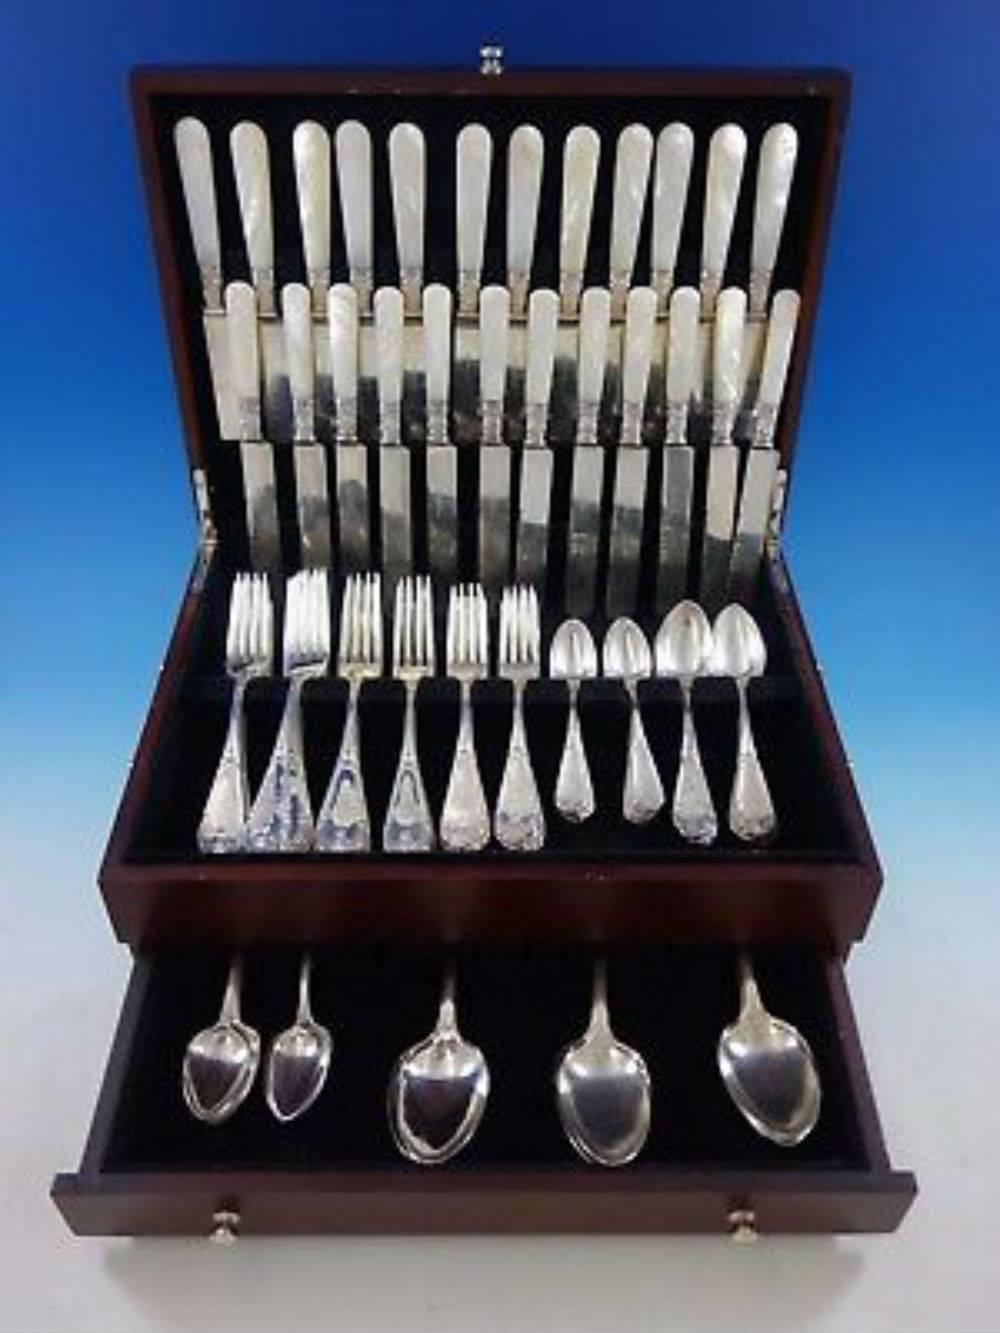 Rare early figural gargoyle by Vanderslice, circa 1868, Sterling silver dinner and luncheon size flatware set with mother-of-pearl knives-124 pieces. Early sets of sterling usually included mother-of-pearl knives-hollow handle knives were invented